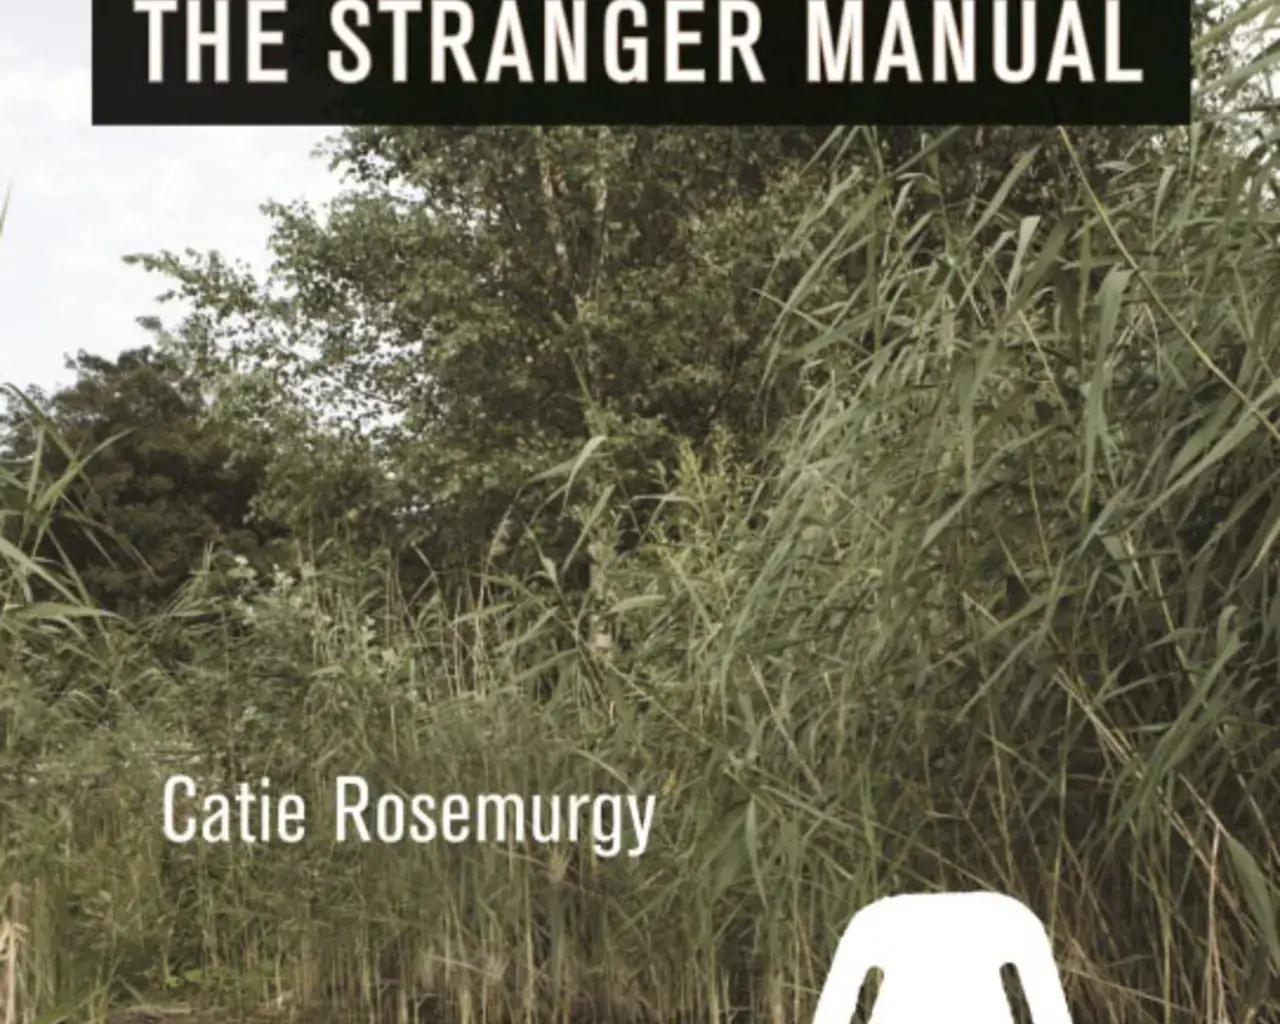 Cover of Catie Rosemurgy&#39;s The Stranger Manual, published by Graywolf Press (2010).